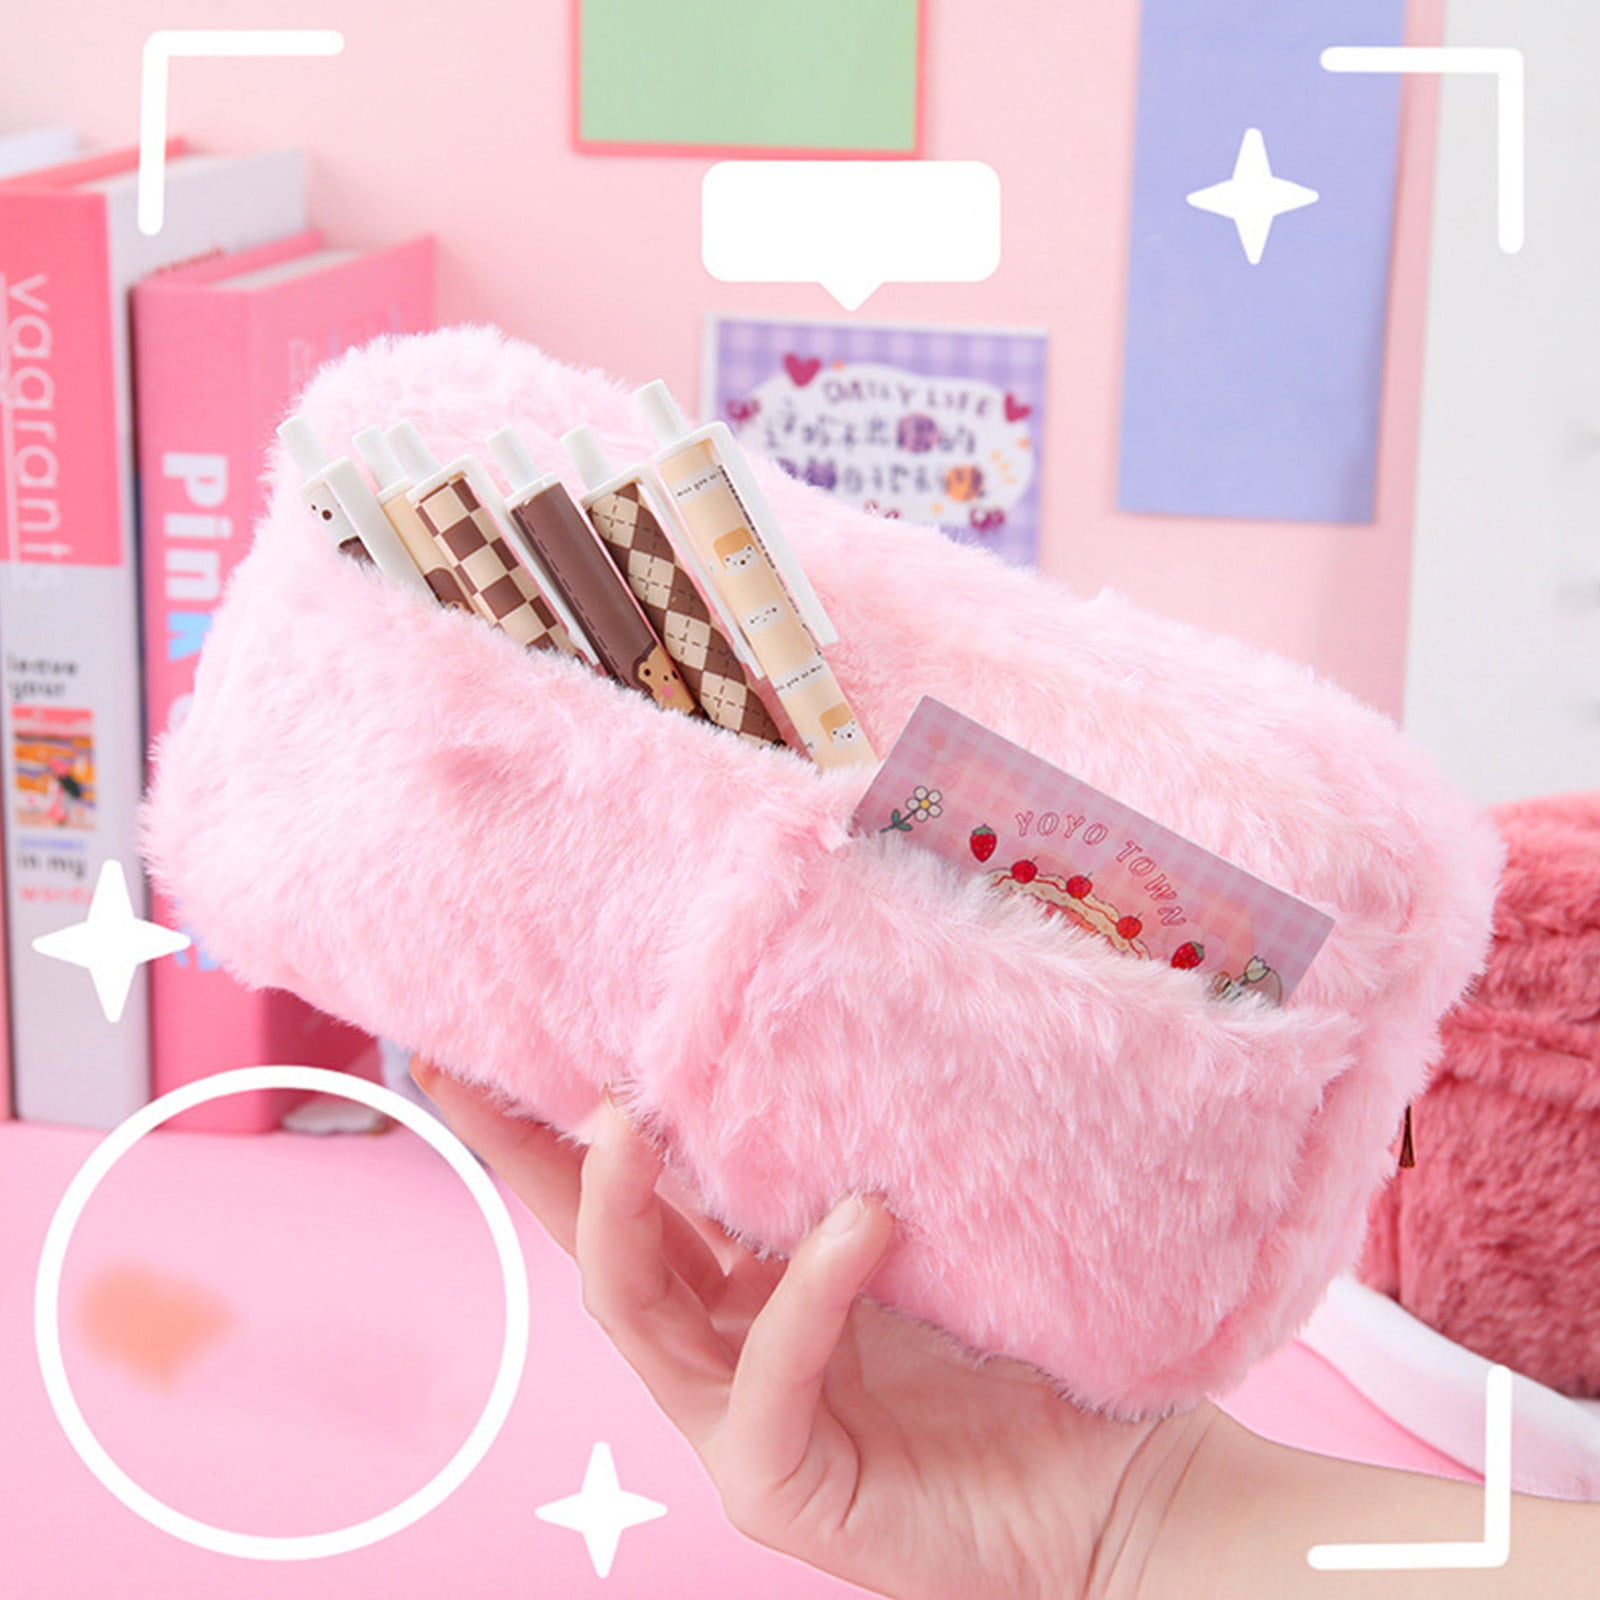 Bkfydls School Supplies Clearance Pencil Case Pencil Pouch Pencil Case Student Pencil Bag Coin Bag Cosmetic Bag Office Stationery Storage Bag Youth